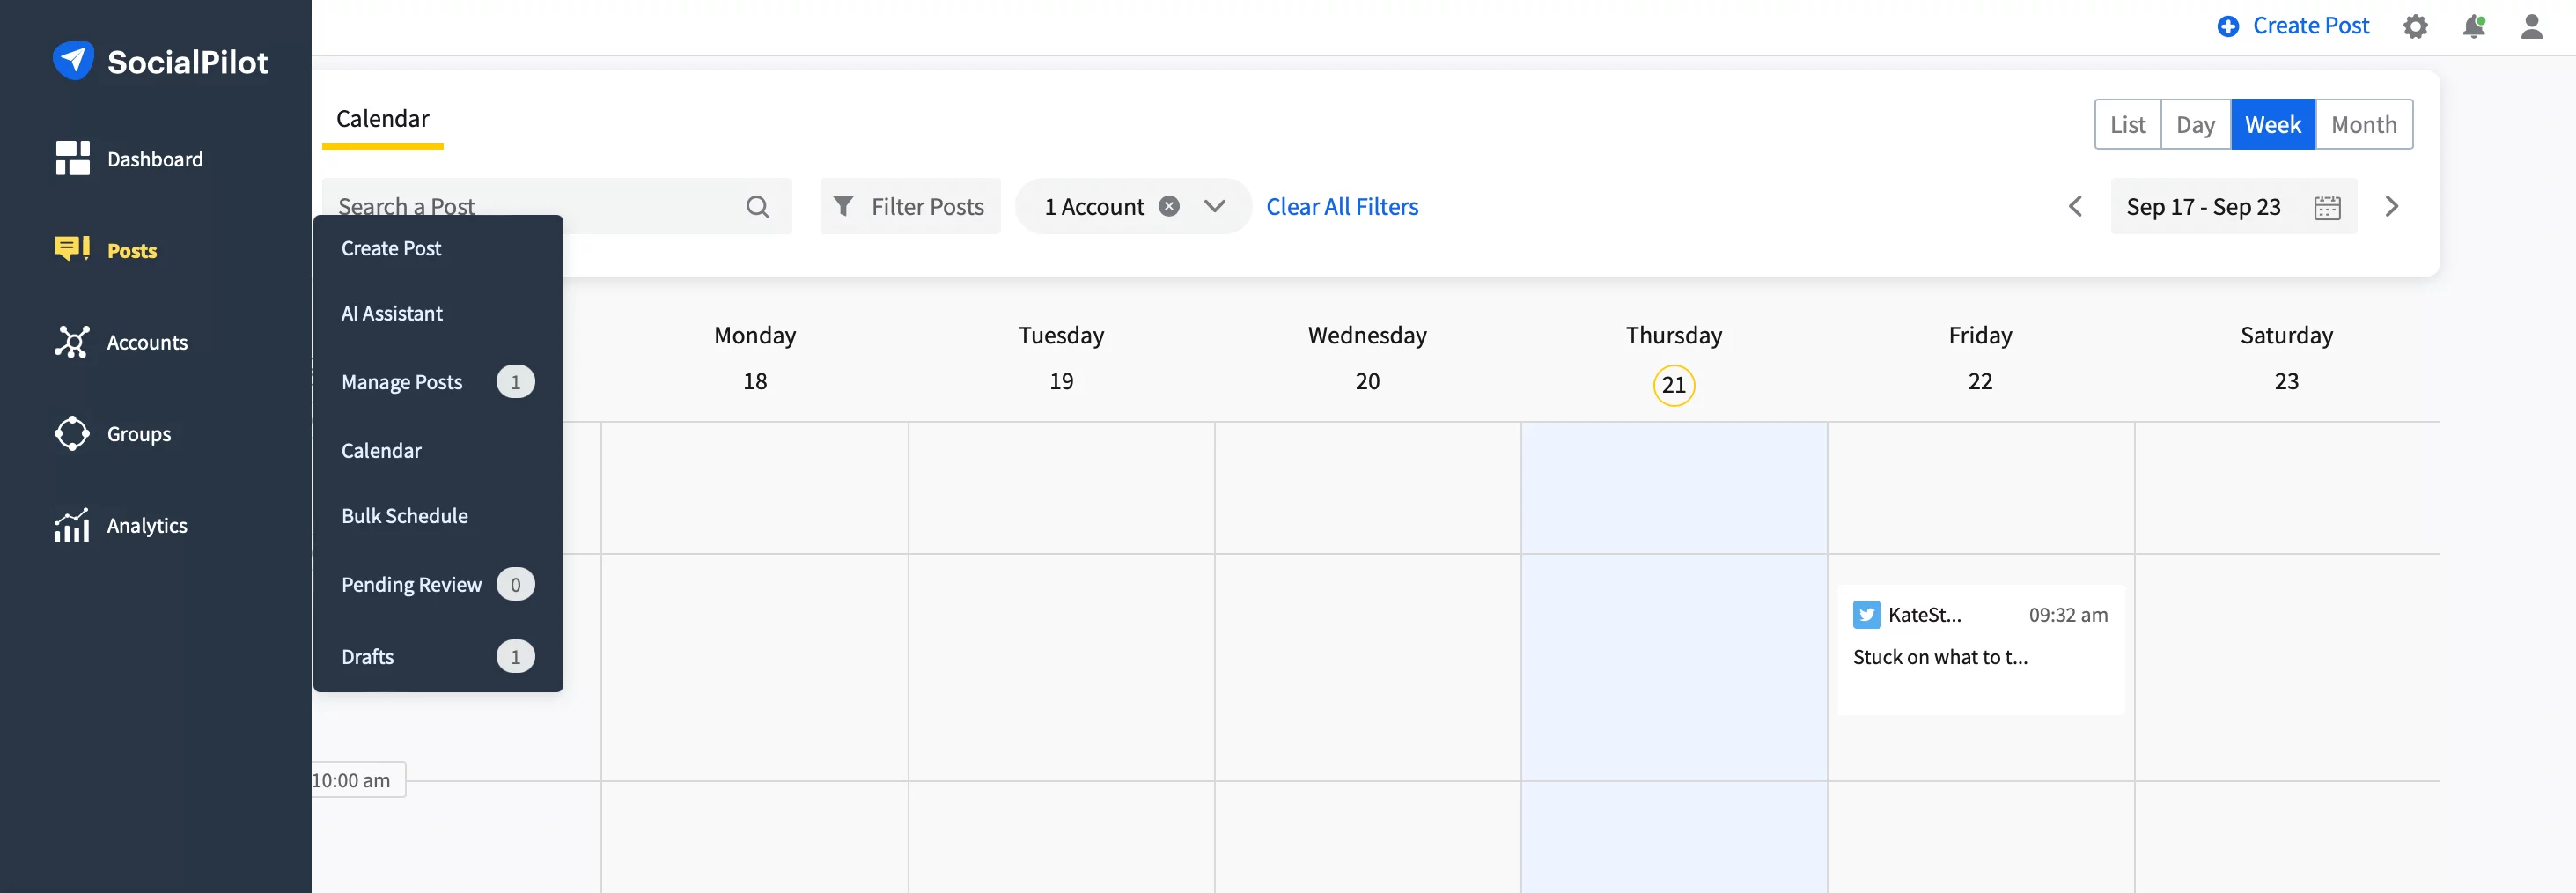 Simple calendar interface showing weekly posts schedule for one account, with filter option and a vertical left-side menu for Dahboard, Posts, Accounts, Groups and Analytics.